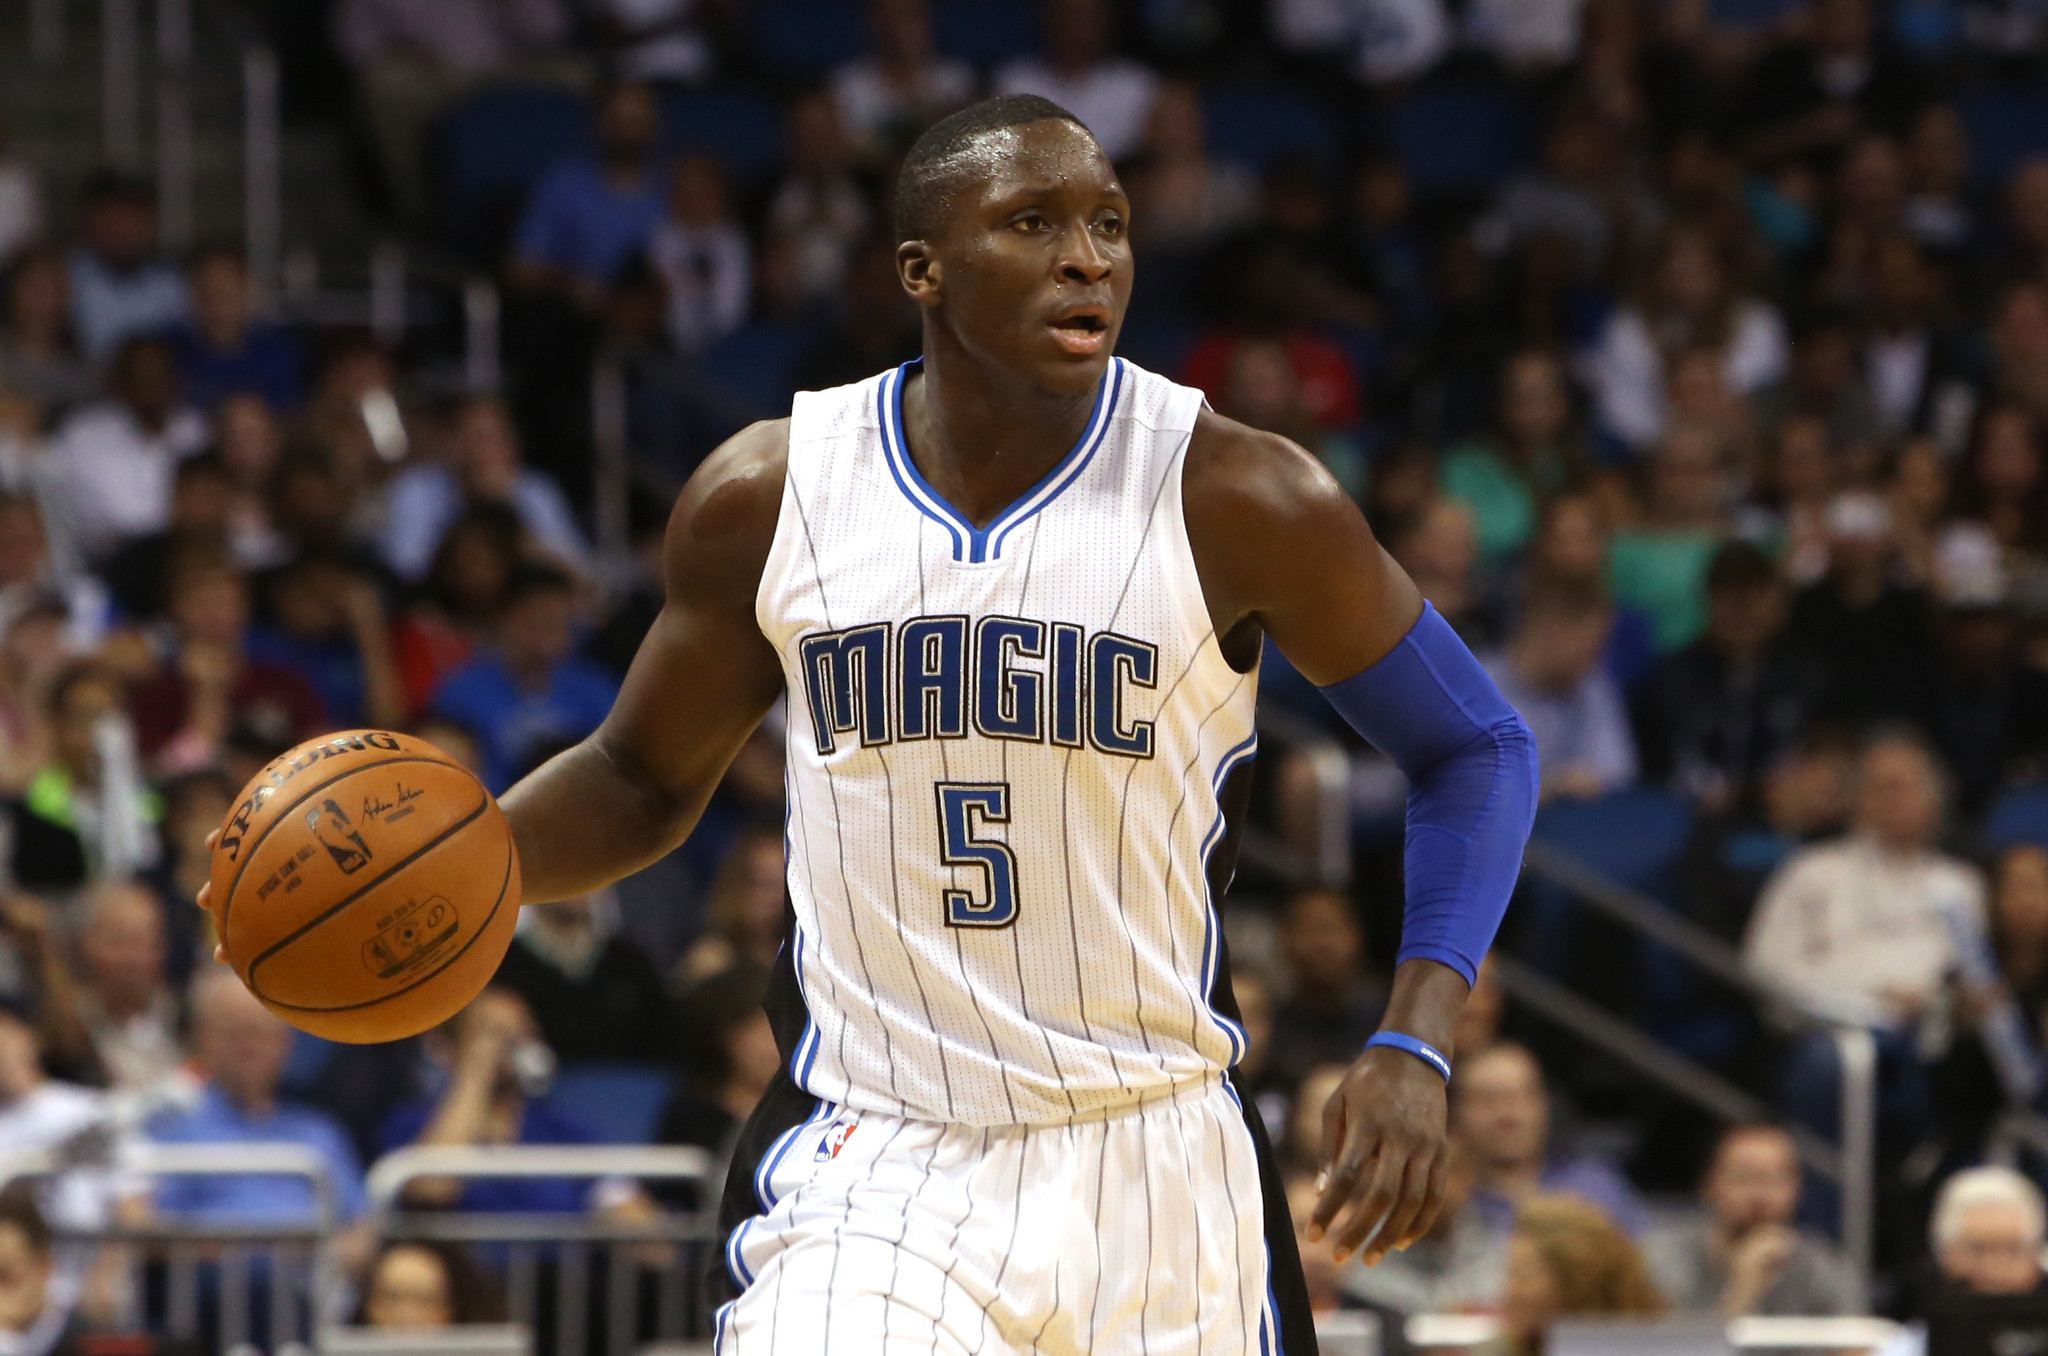 Victor Oladipo might return from injury and play against Charlotte - Orlando Sentinel2048 x 1356